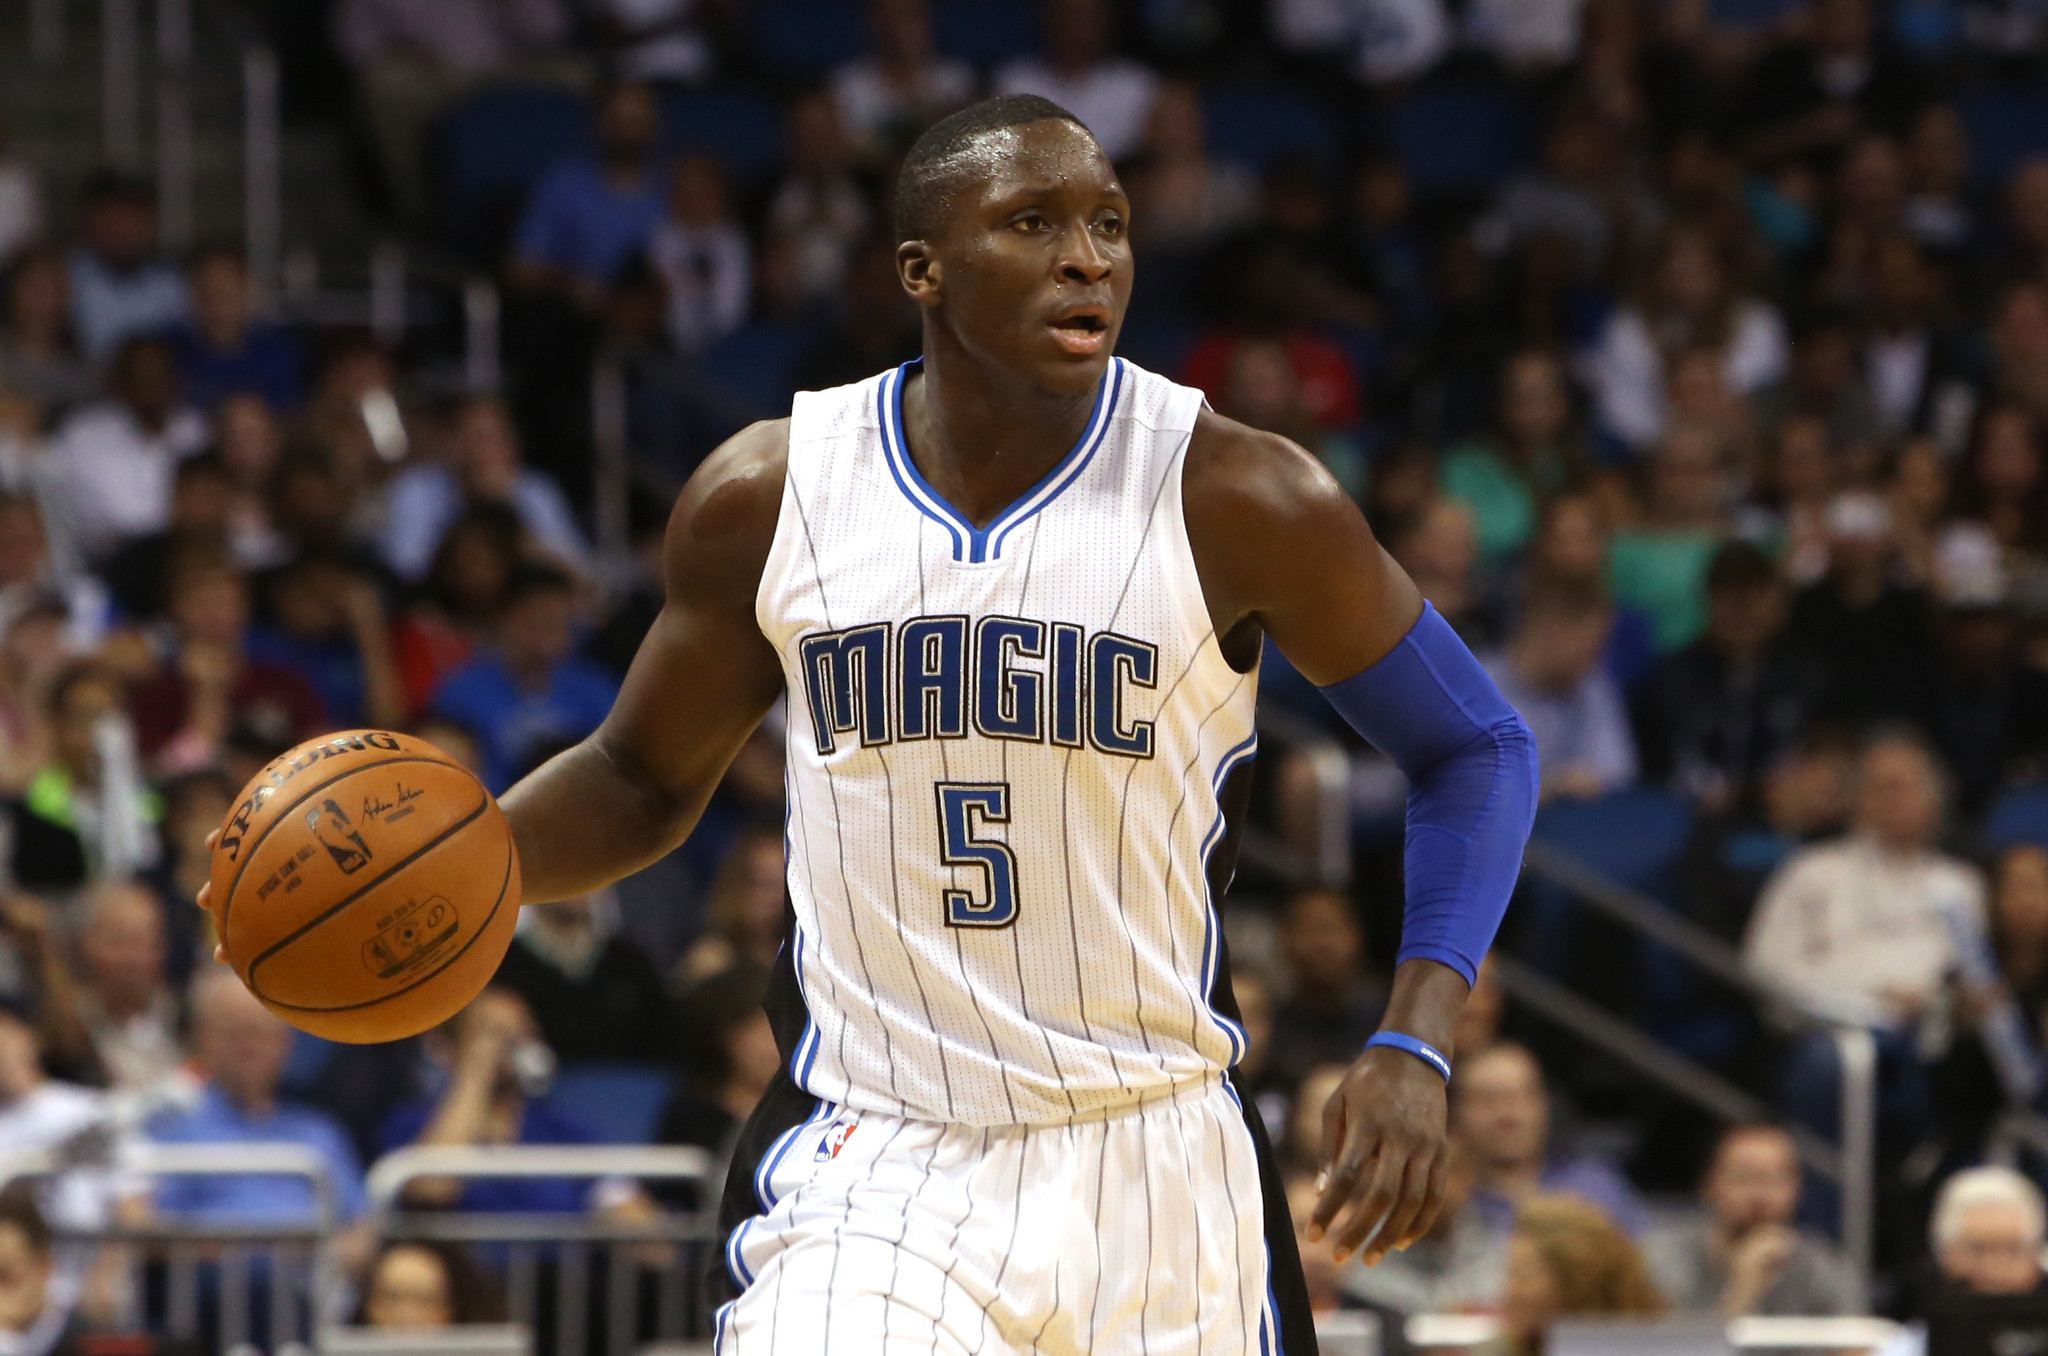 Victor Oladipo might return from injury and play against Charlotte - Orlando Sentinel2048 x 1356